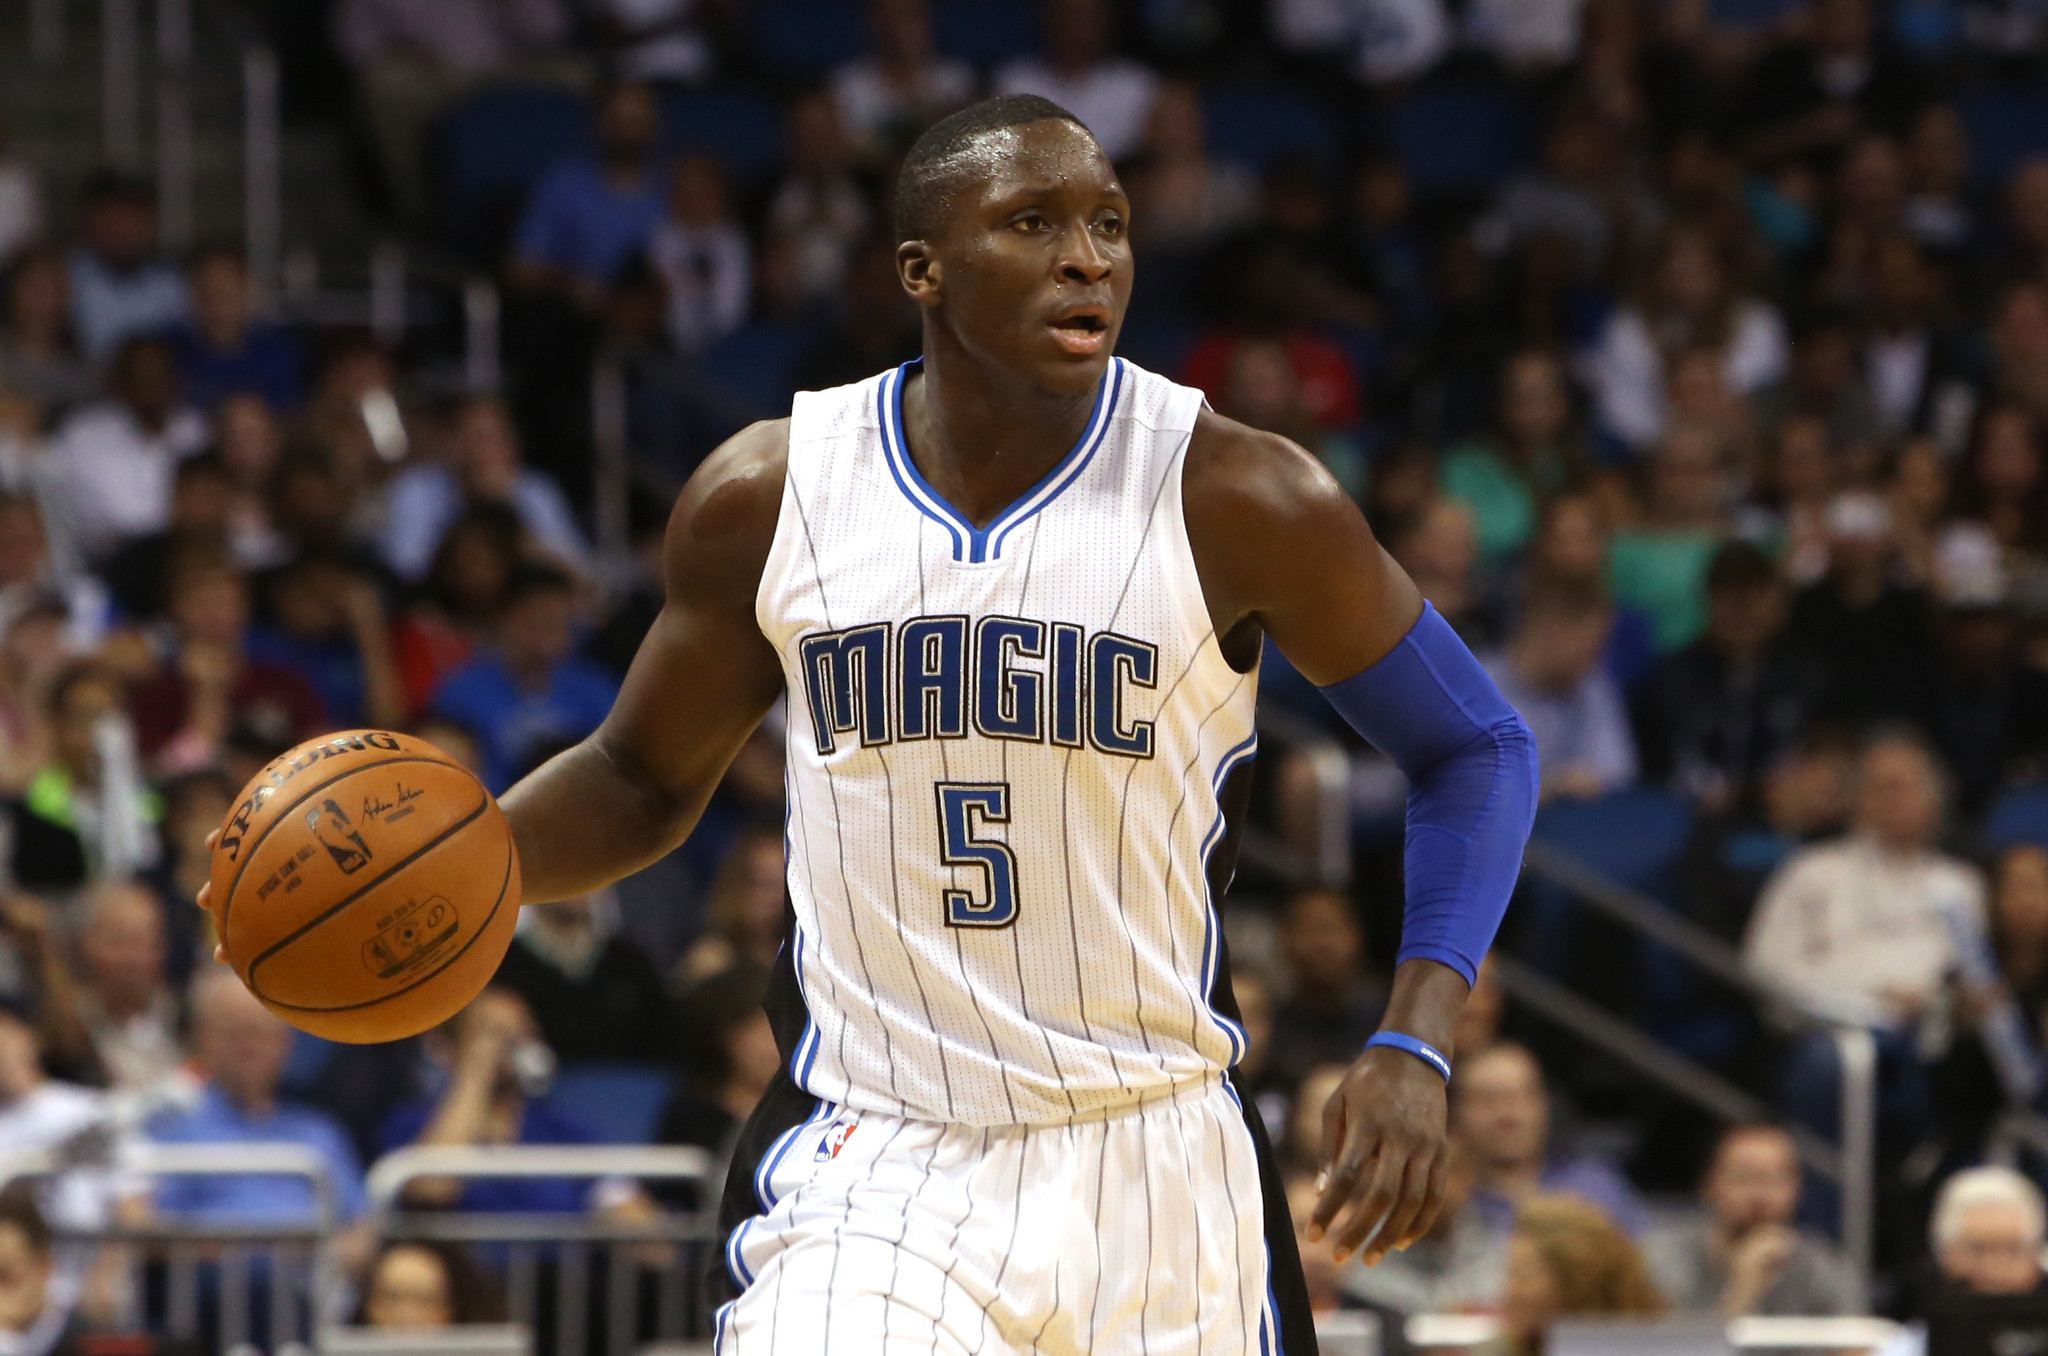 Victor Oladipo might return from injury and play against Charlotte - Orlando Sentinel2048 x 1356